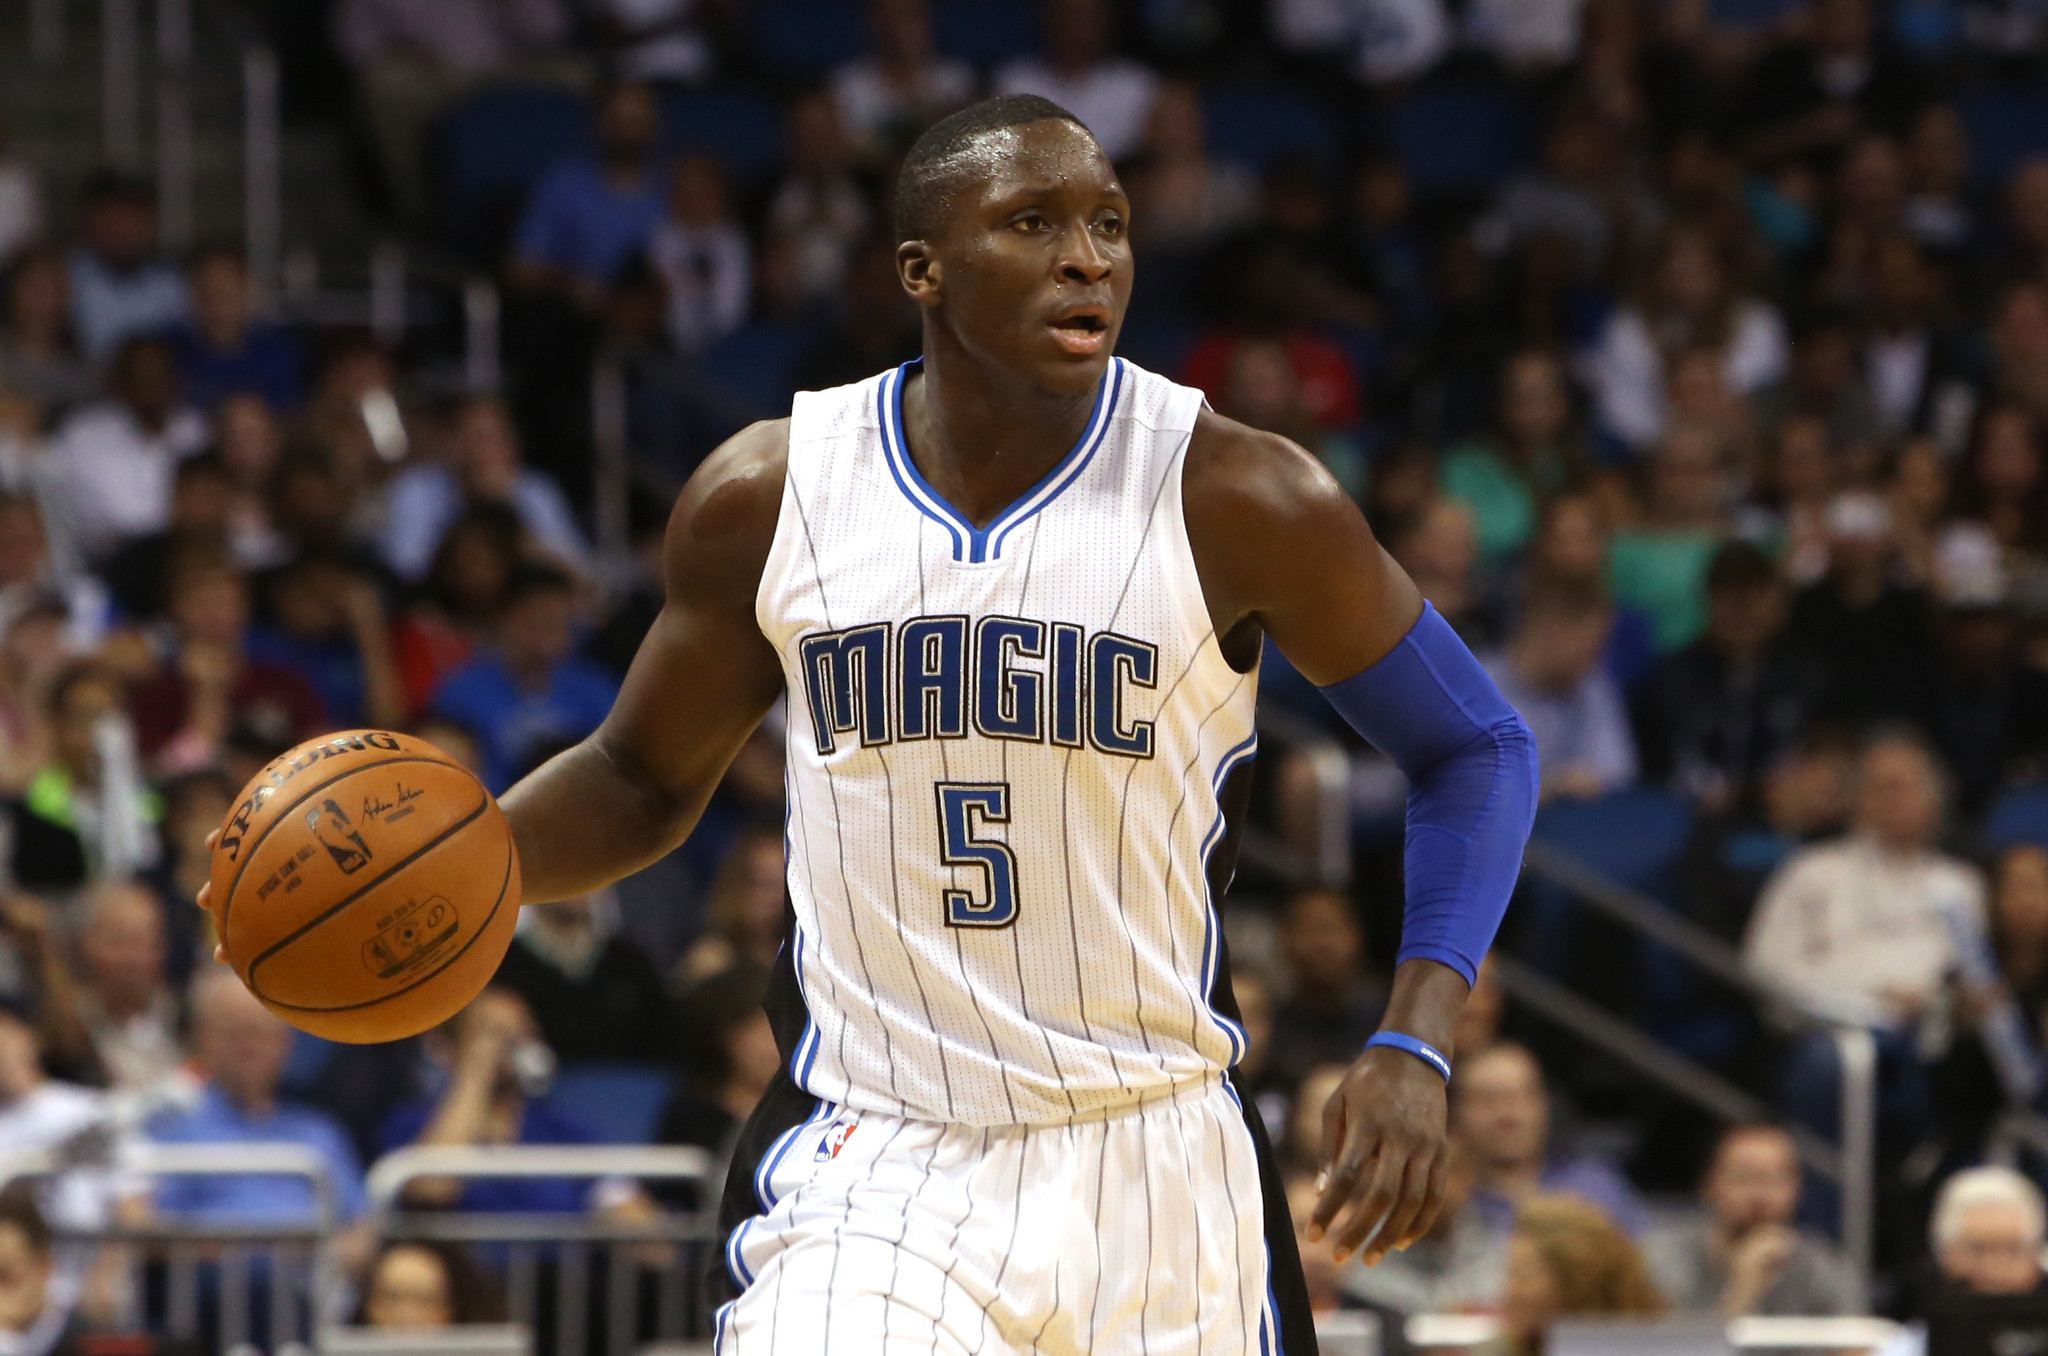 Victor Oladipo might return from injury and play against Charlotte - Orlando Sentinel2048 x 1356